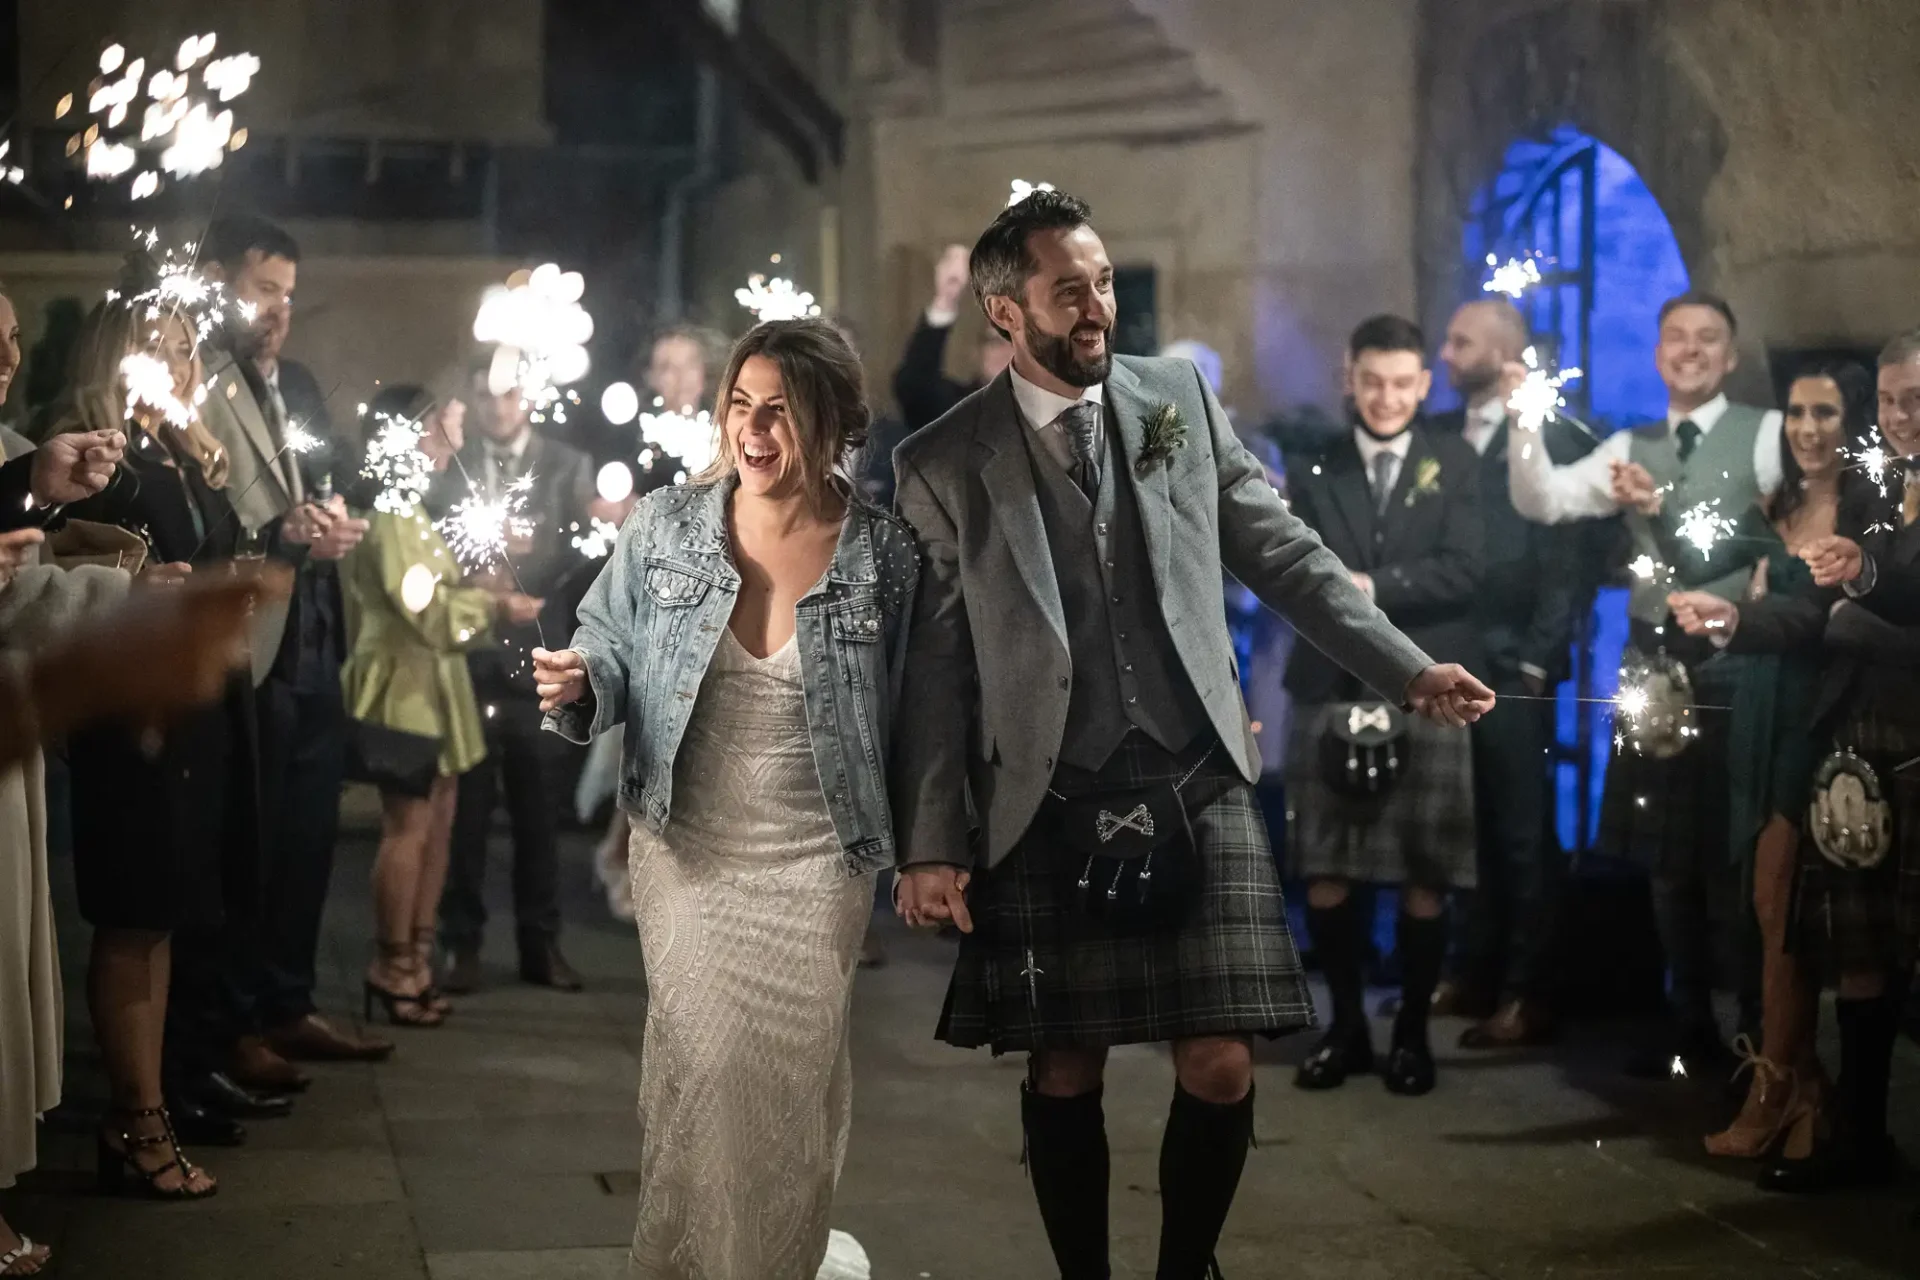 A joyful bride and groom walk through a sparkler send-off at night, with guests lined up on both sides, the groom in a kilt and the bride in a white dress and denim jacket.